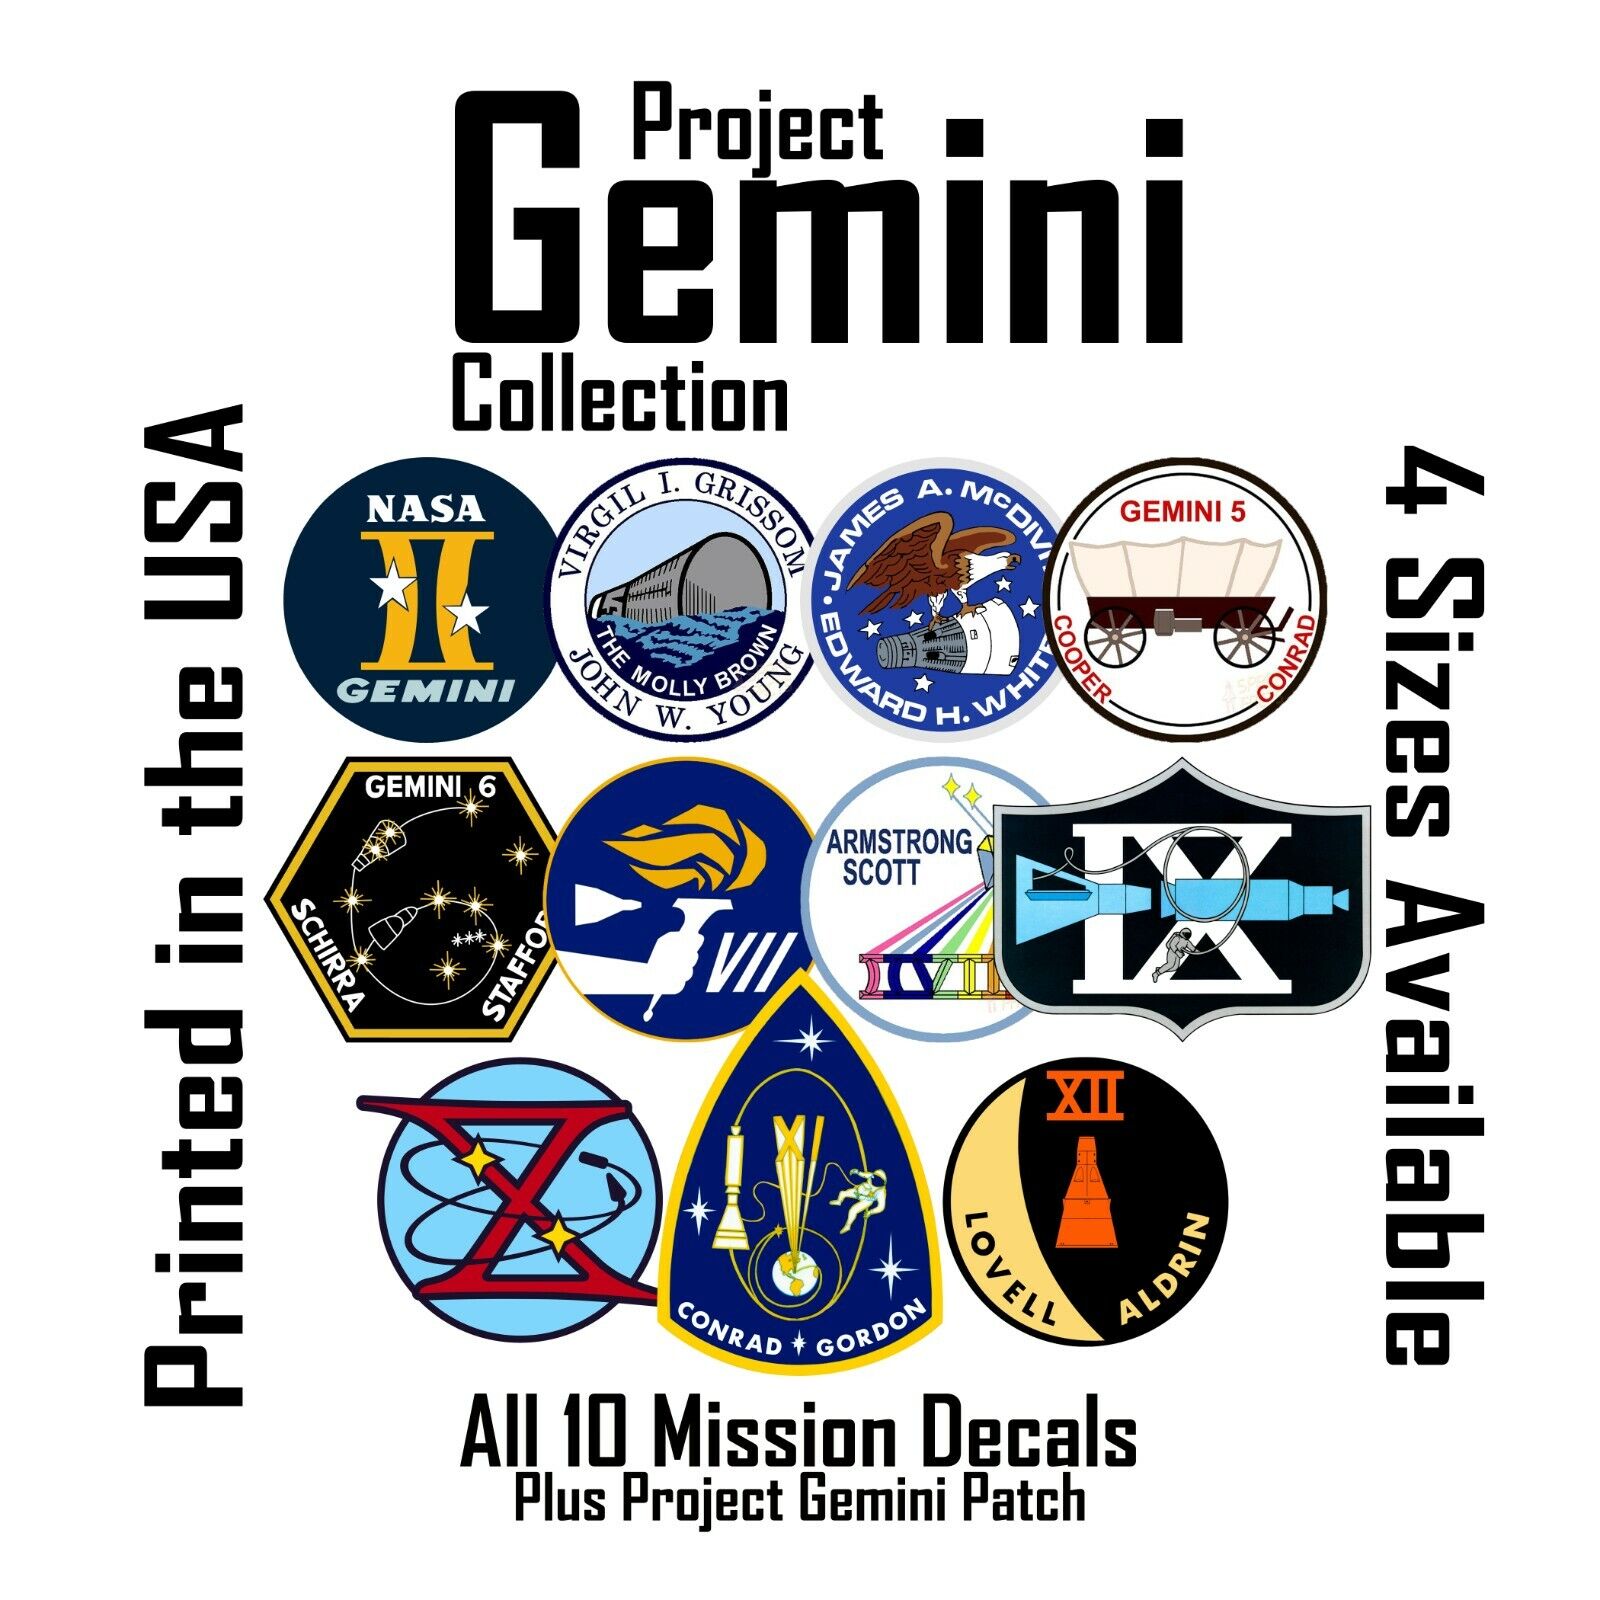 Project Gemini tribute. All NASA Mission patches as decals stickers